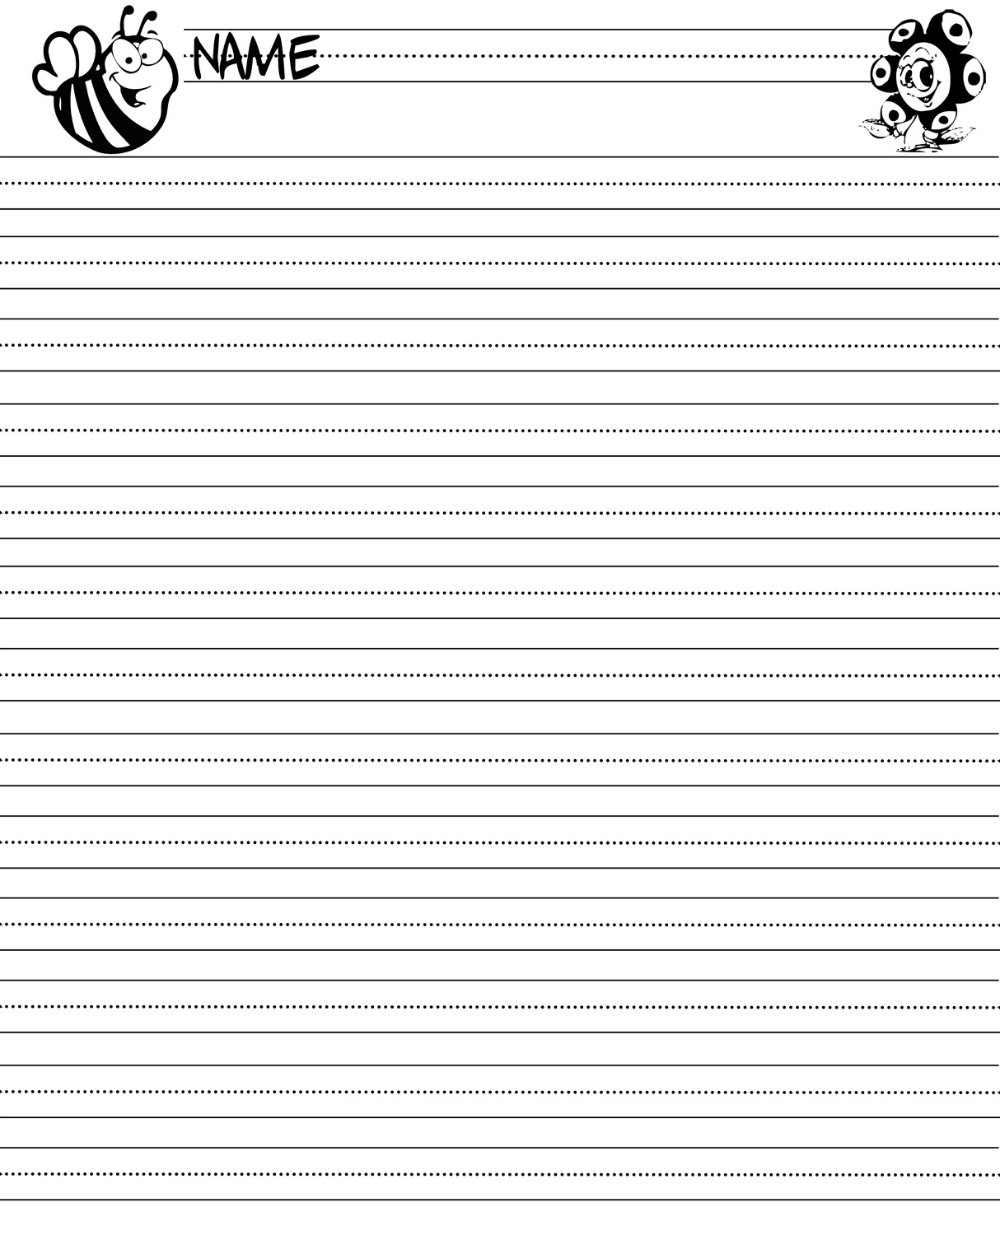 Printable Standard Lined Writing Paper_36554